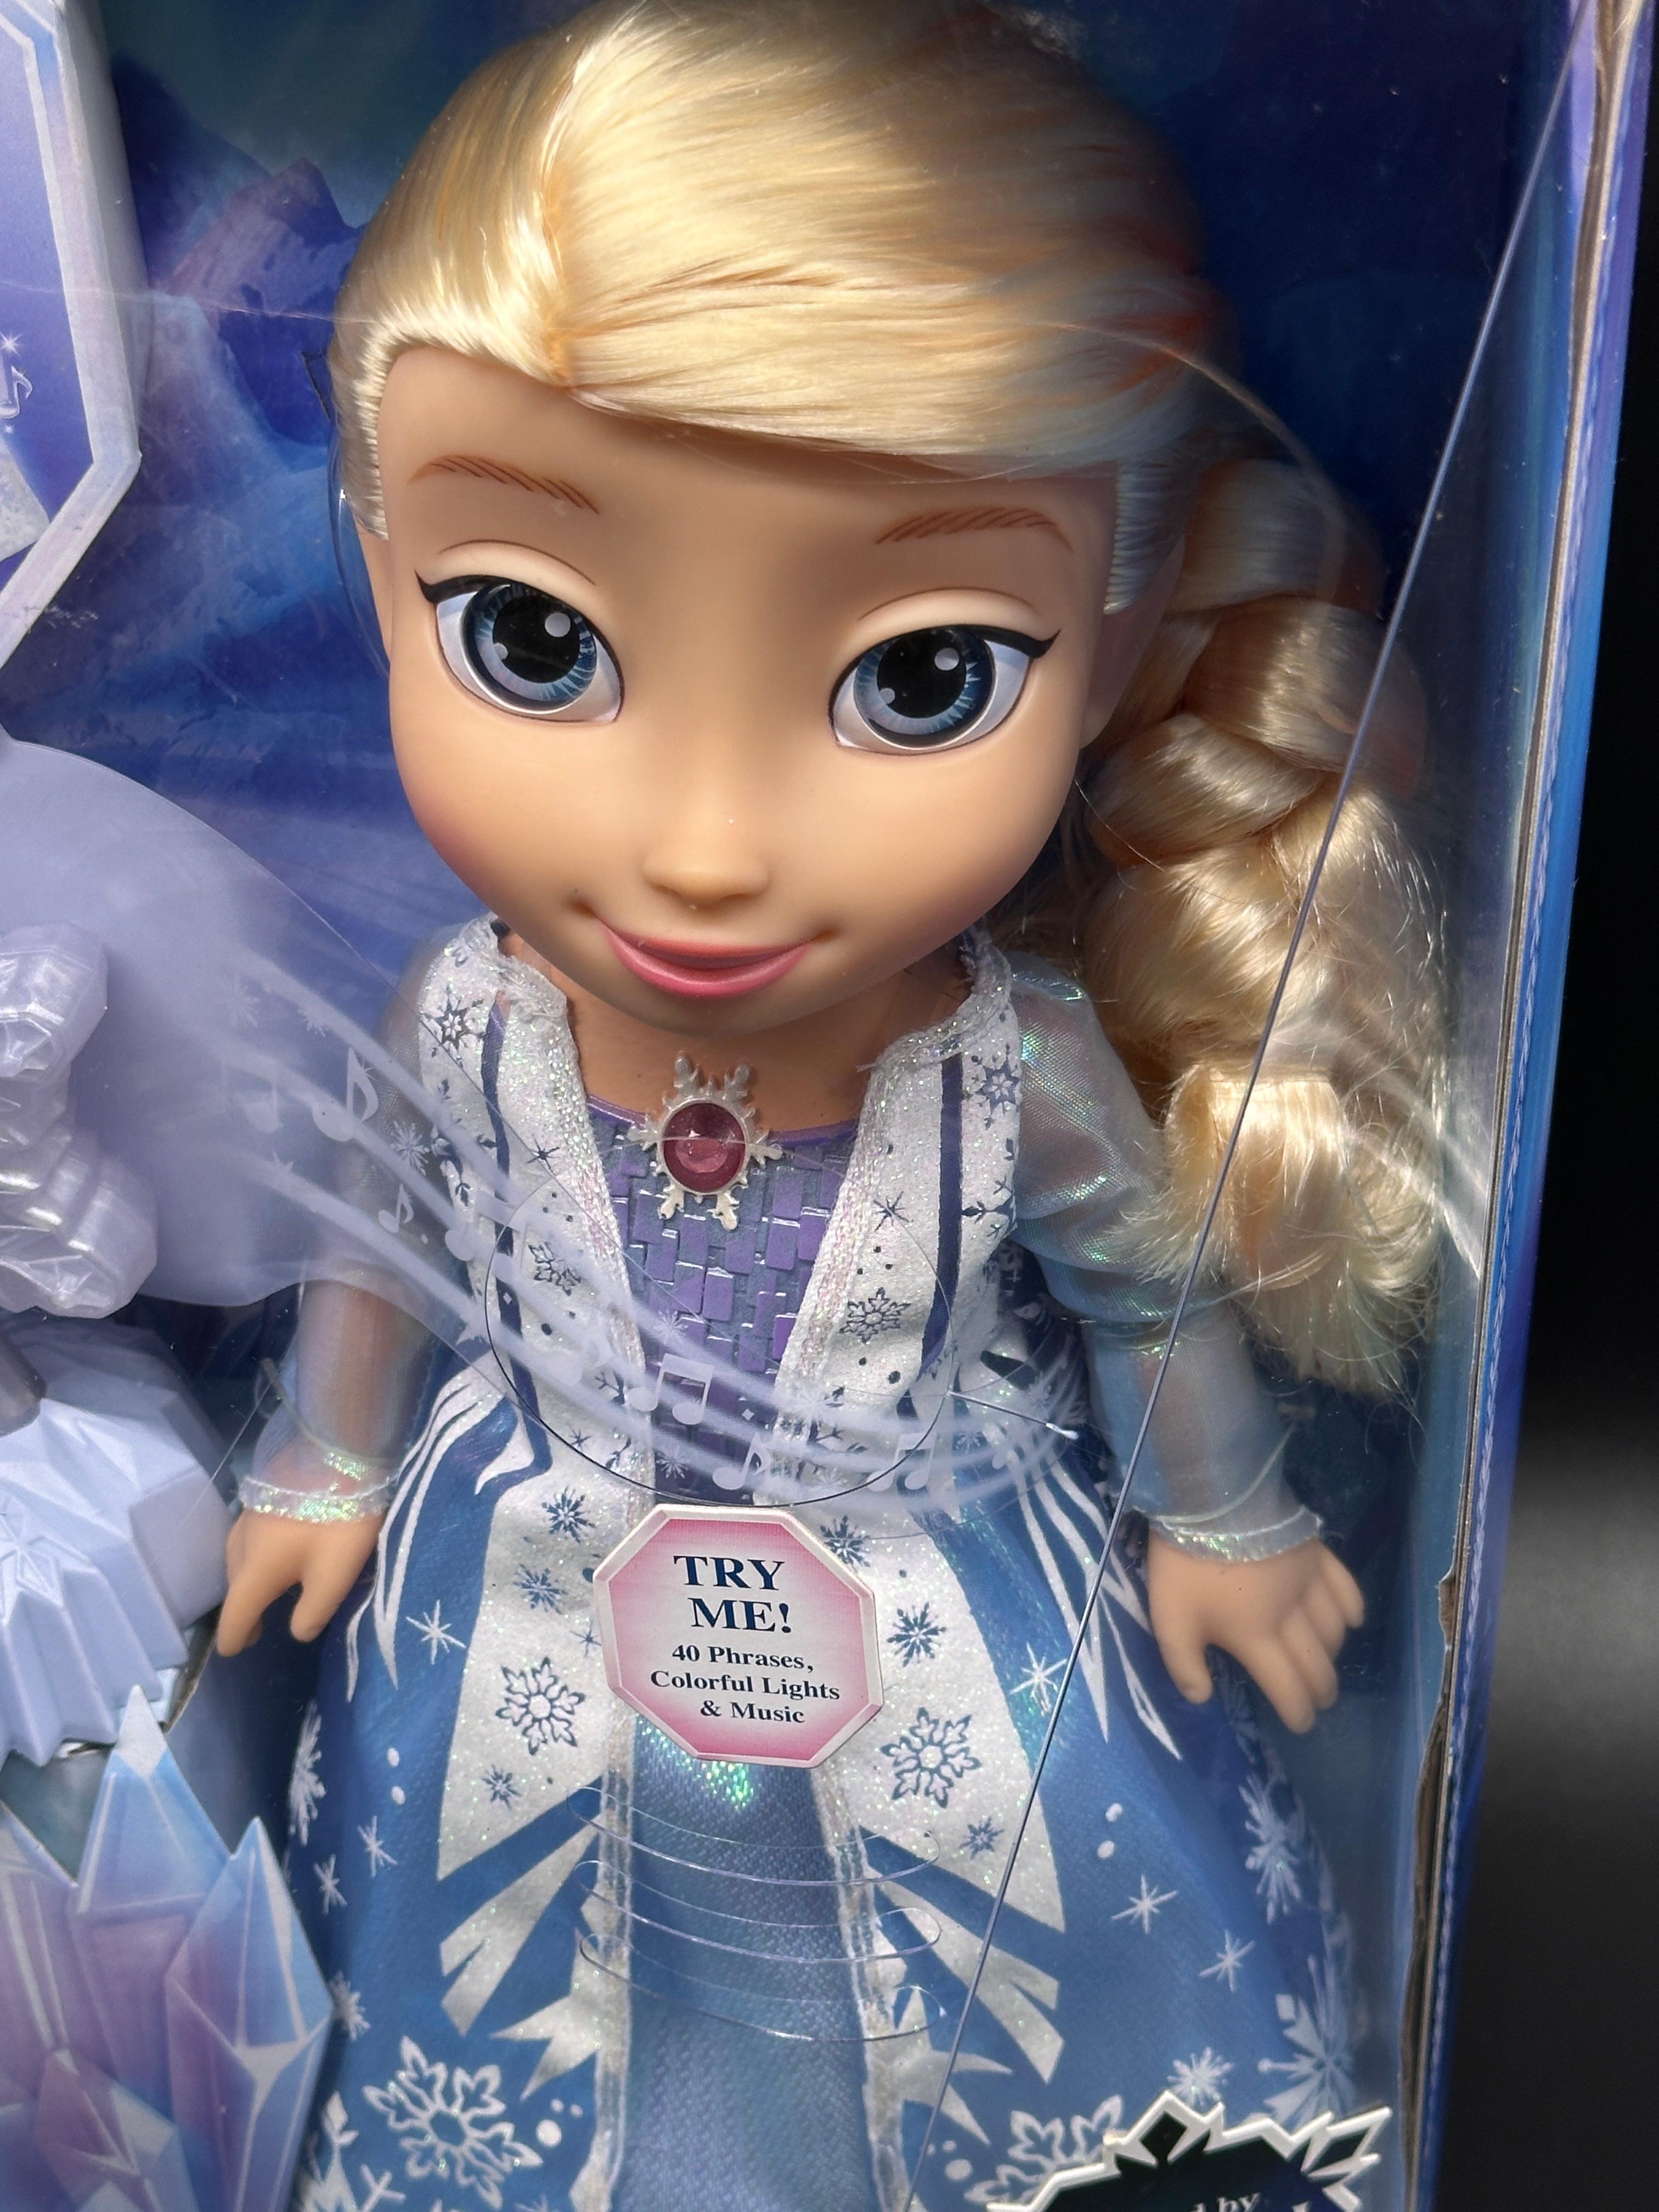 Disney's Frozen Singing Elsa and Olaf-A-Lot Dolls in Package